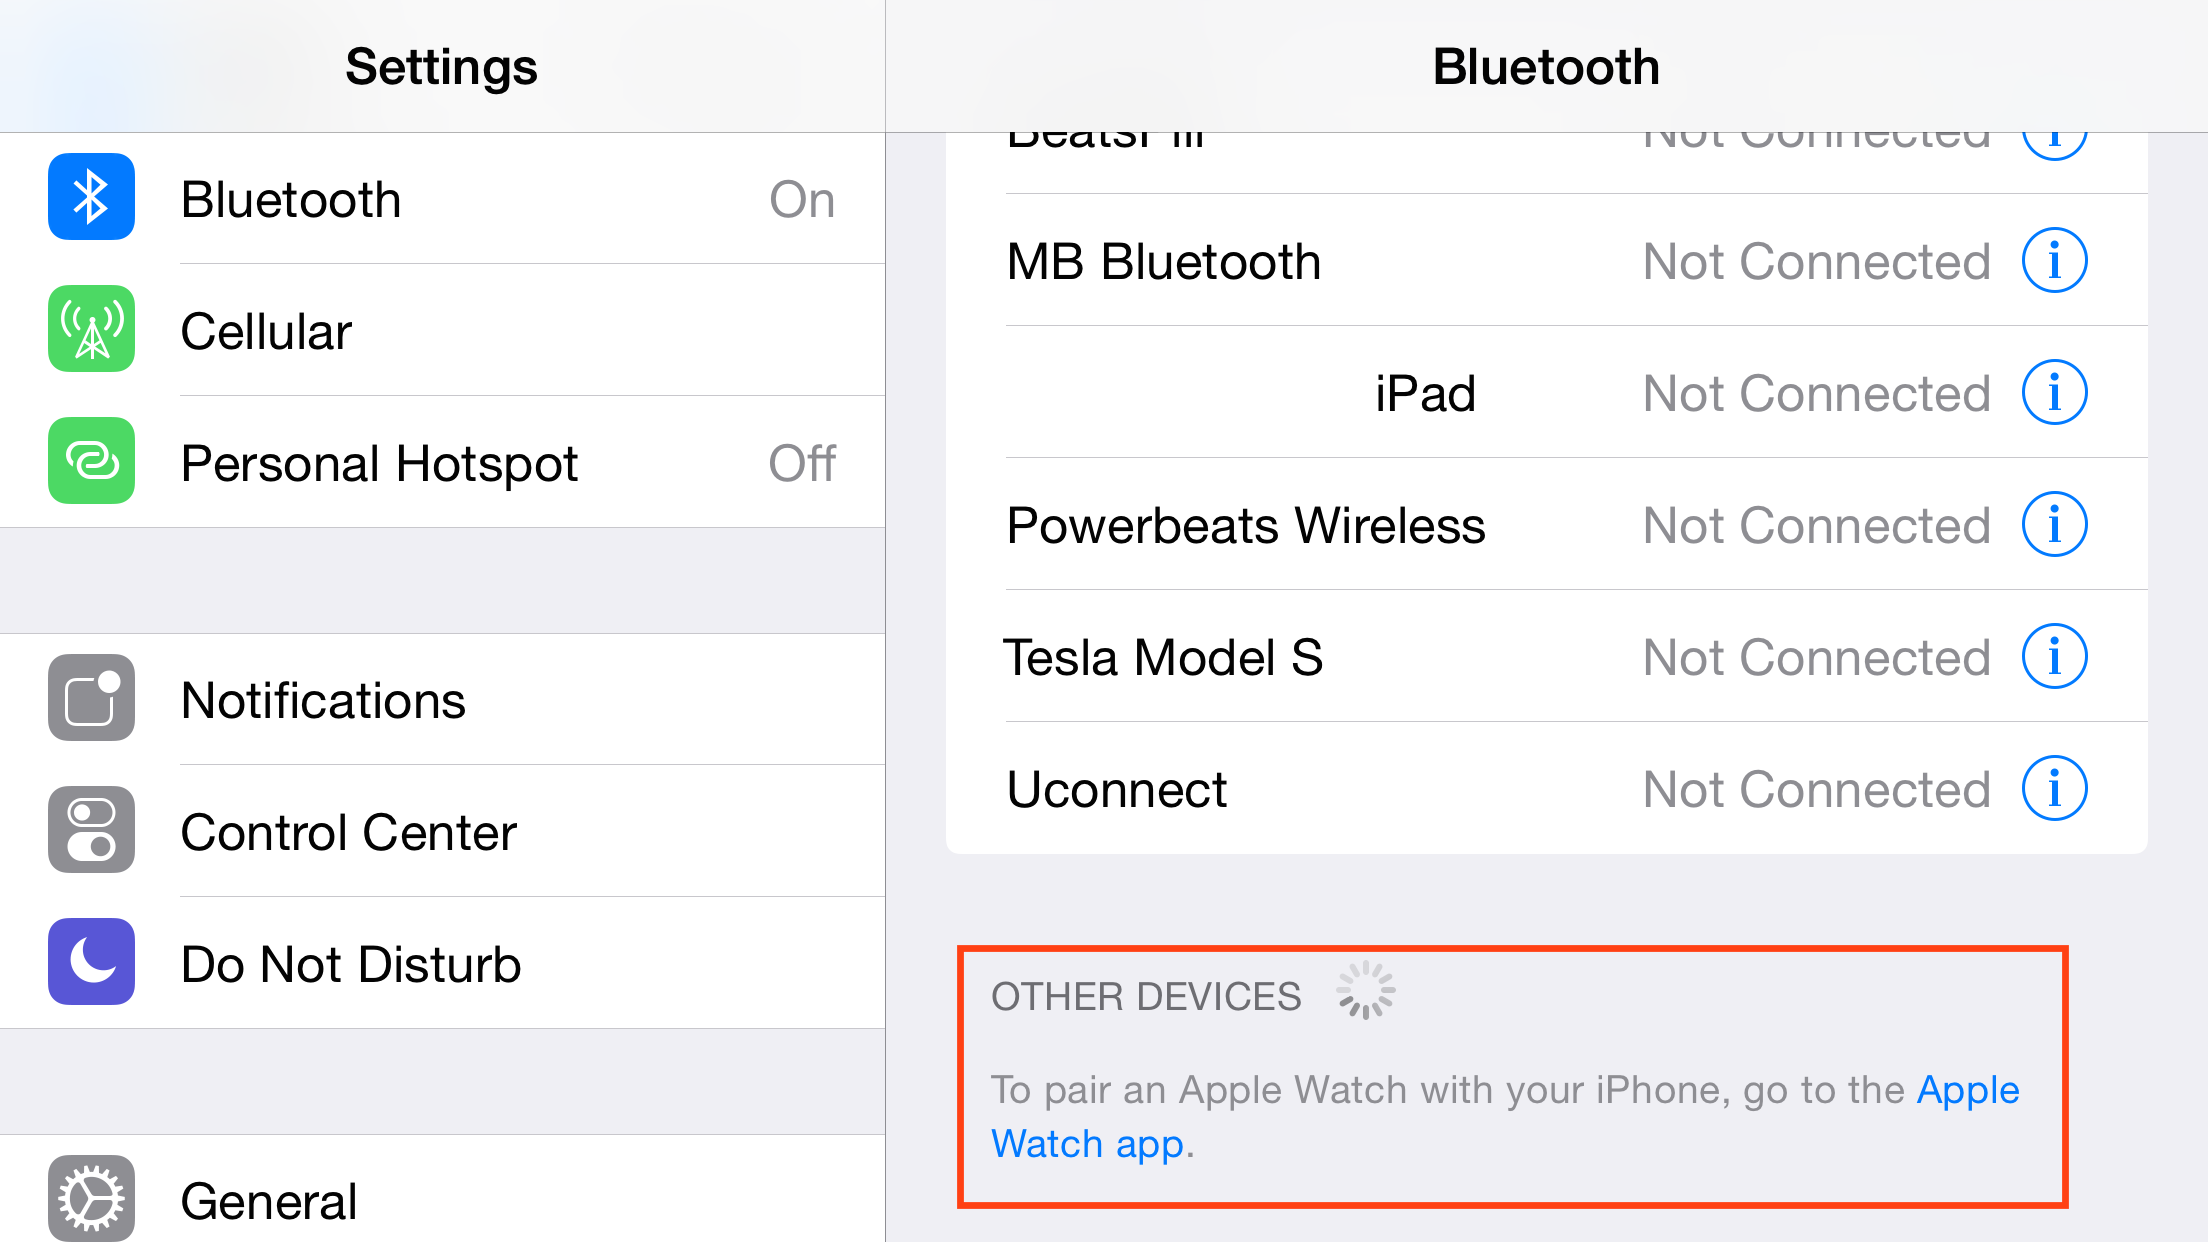 iOS 8.2 Beta Adds Apple Watch Support